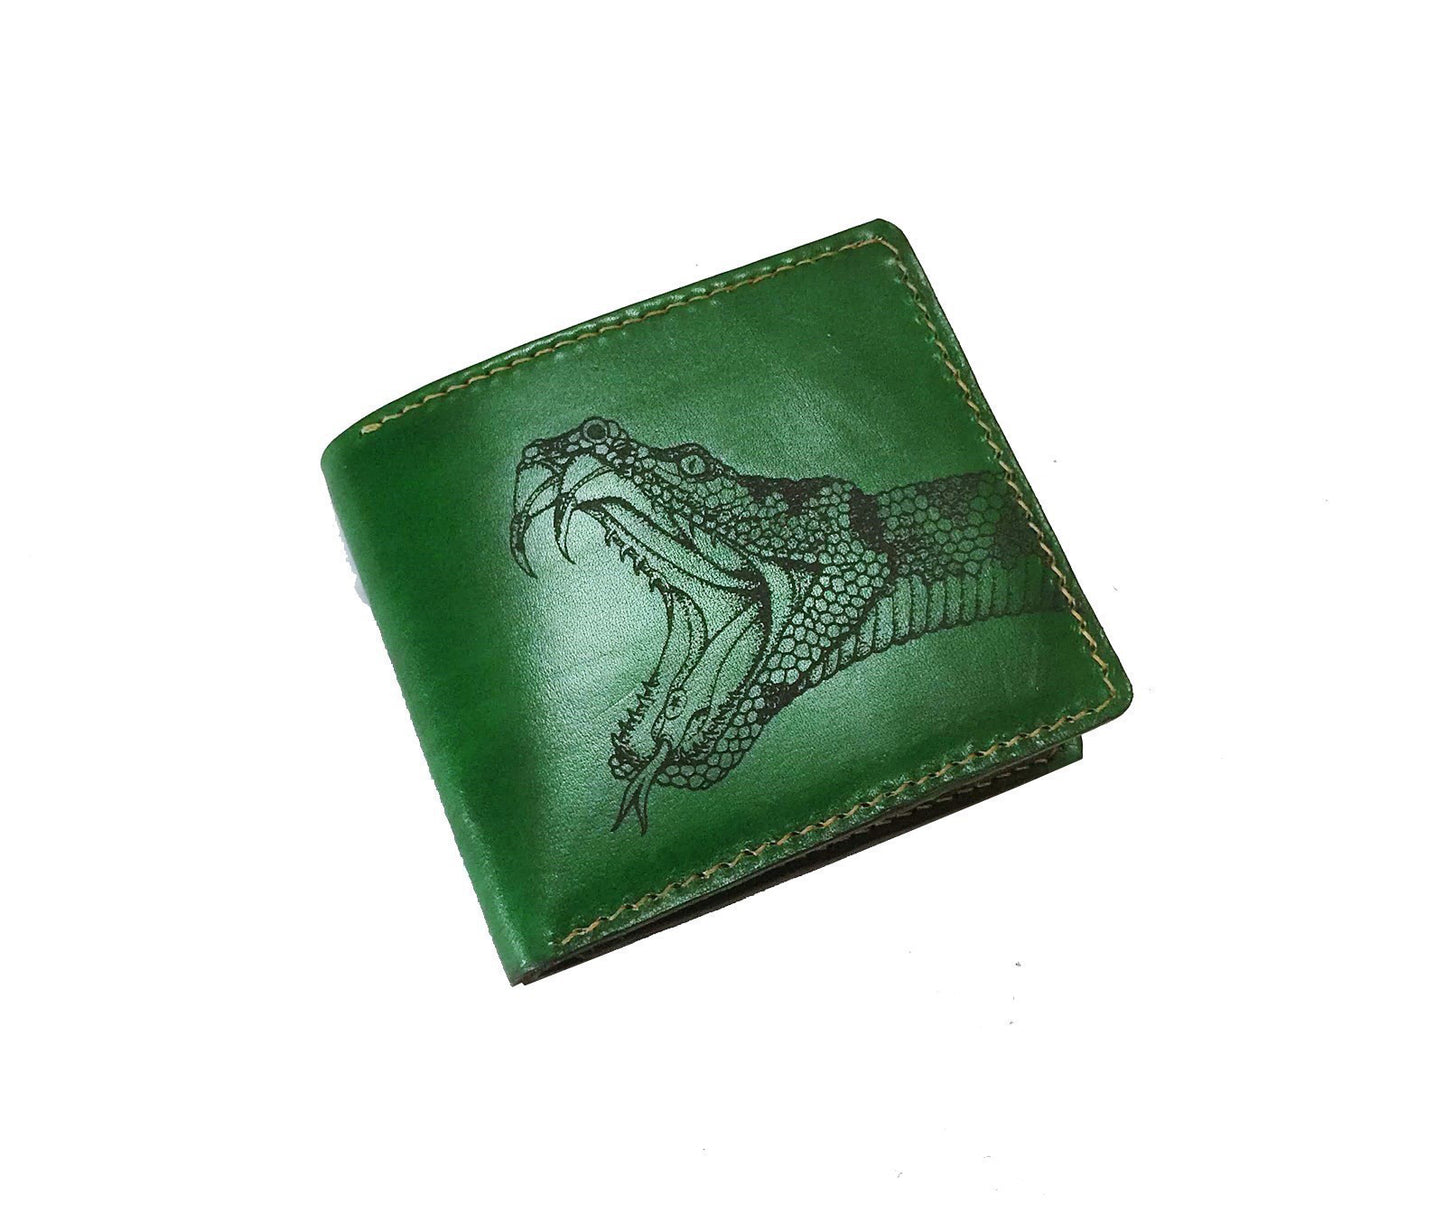 Mayan Corner - Cobra Snake animal leather handmade men's wallet, custom gifts for him, father's day gifts, anniversary gift for men